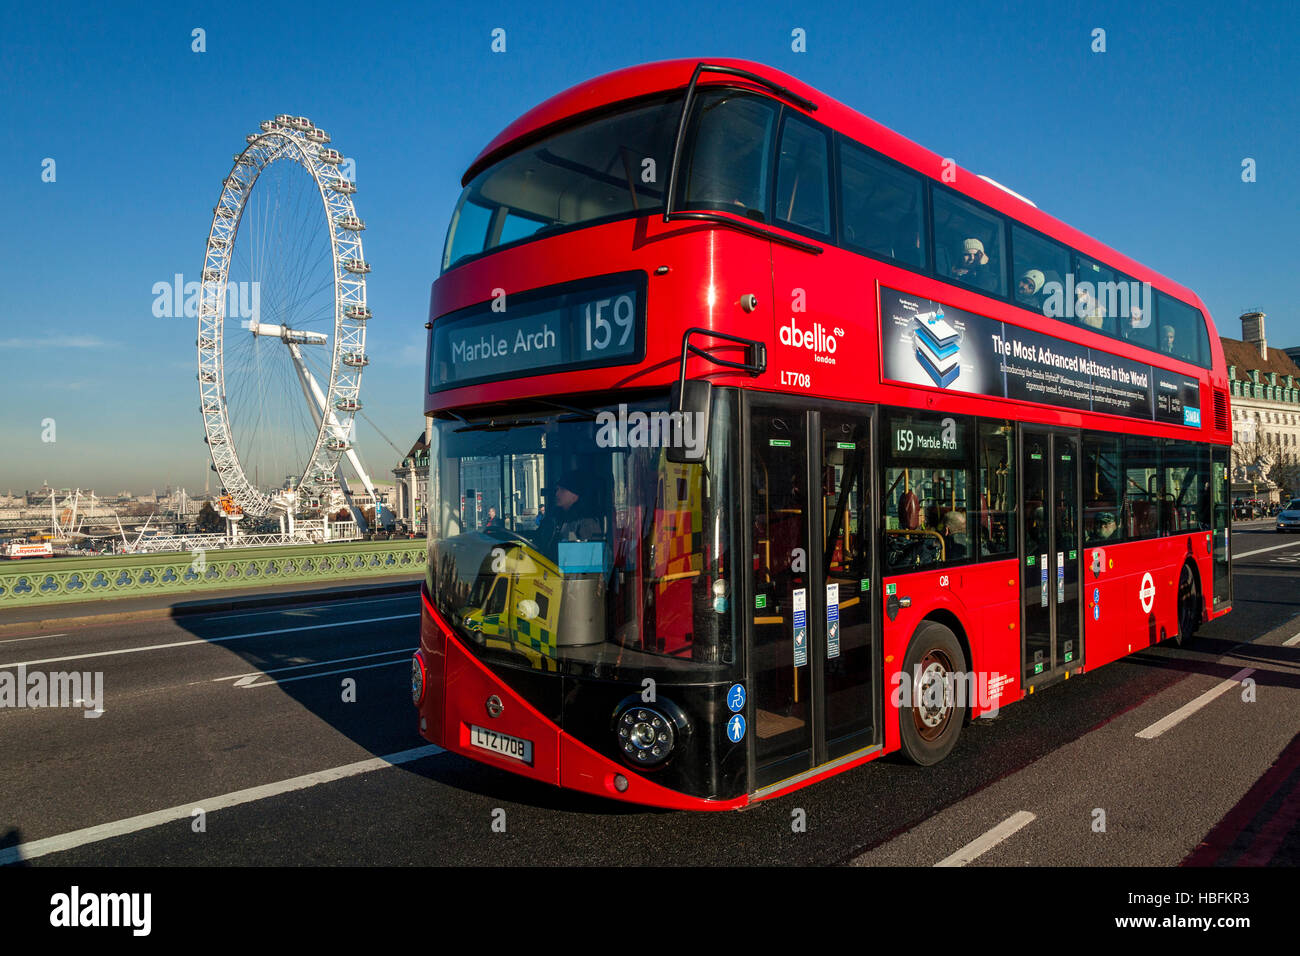 A London Bus Crossing Westminster Bridge With The London Eye In The Backround, London, England Stock Photo